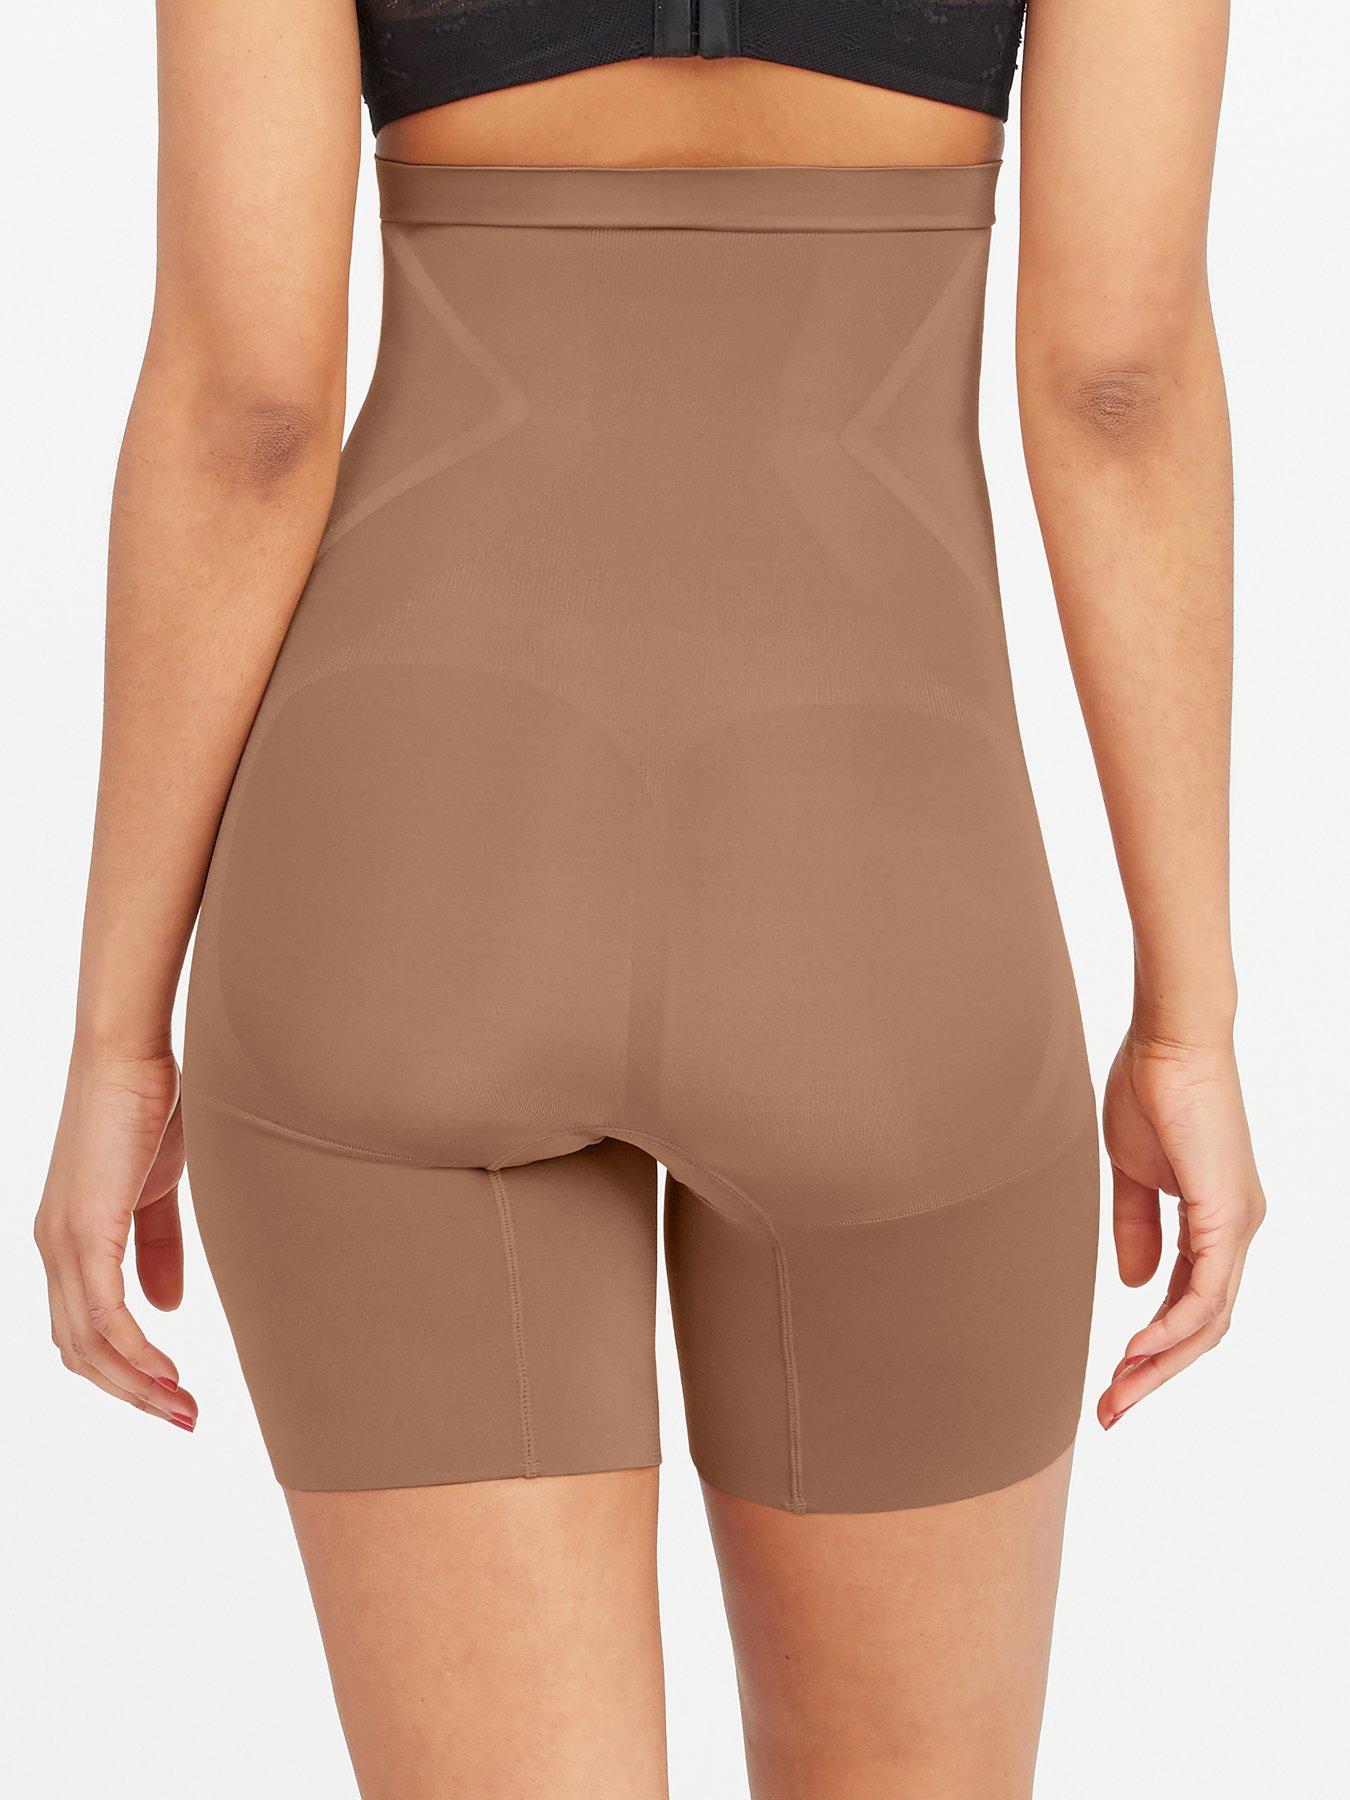 Spanx Higher Power Panties in Cafe Au Lait